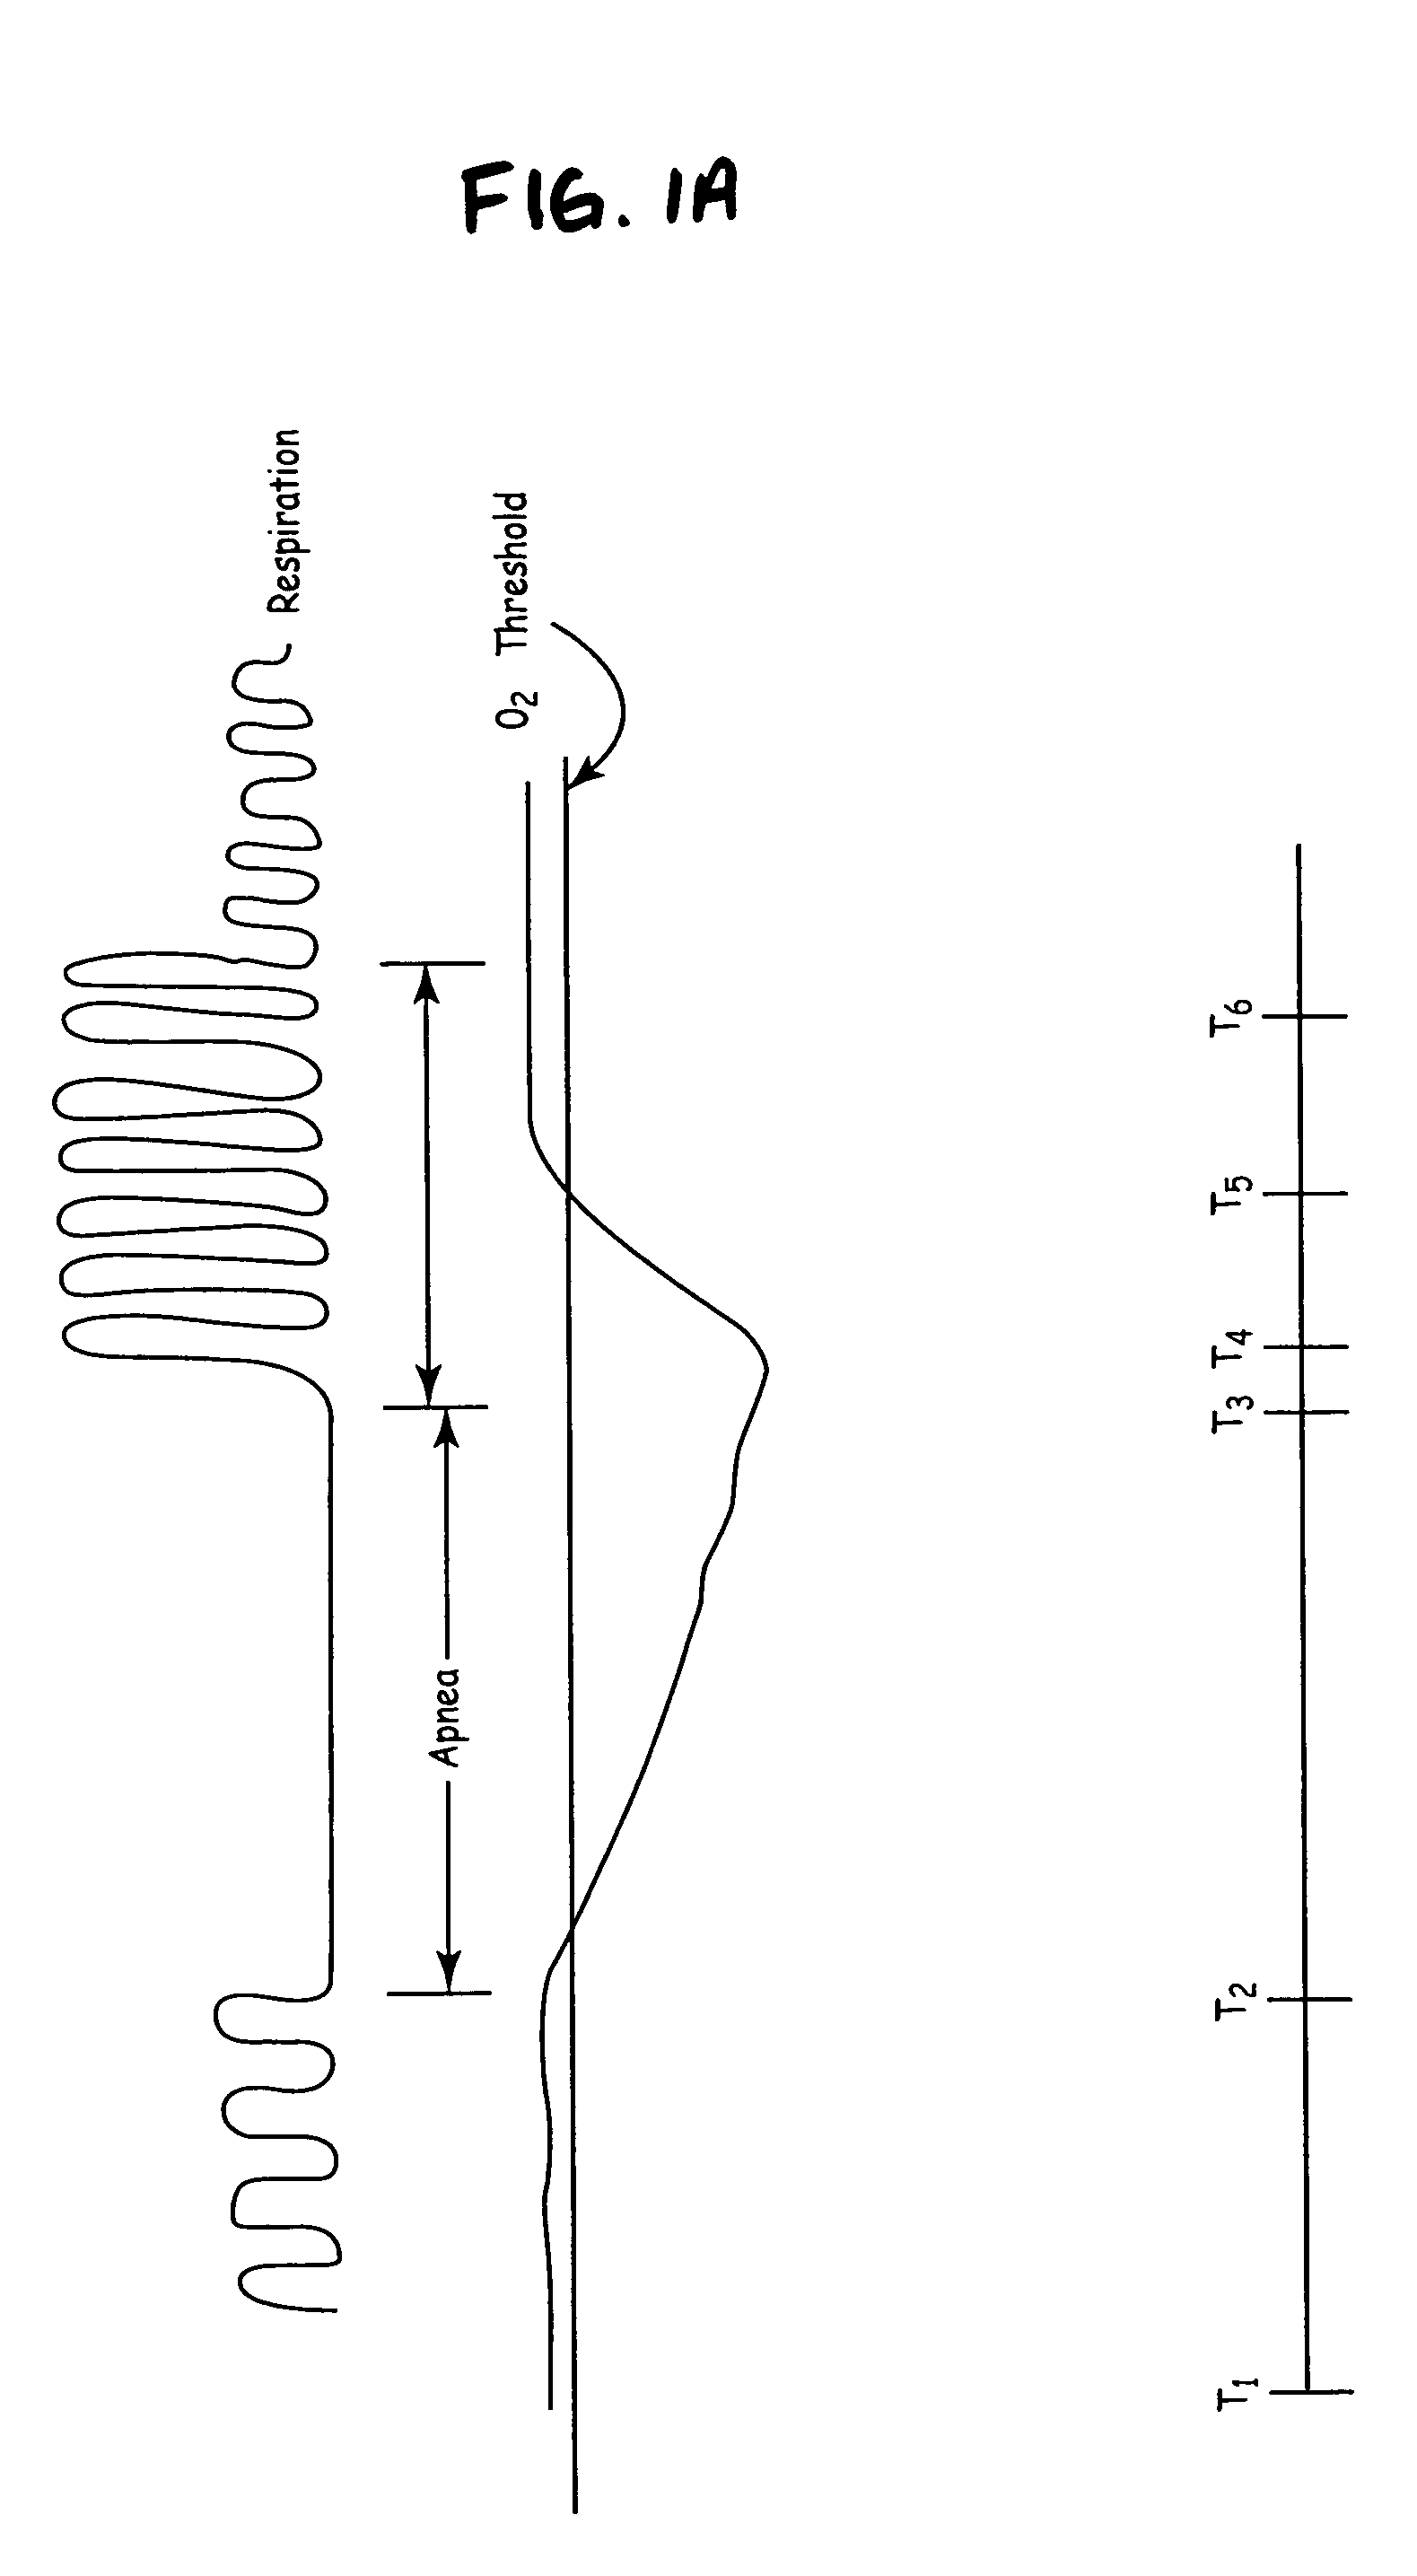 Implantable medical device with circulation delay measurement and therapy control